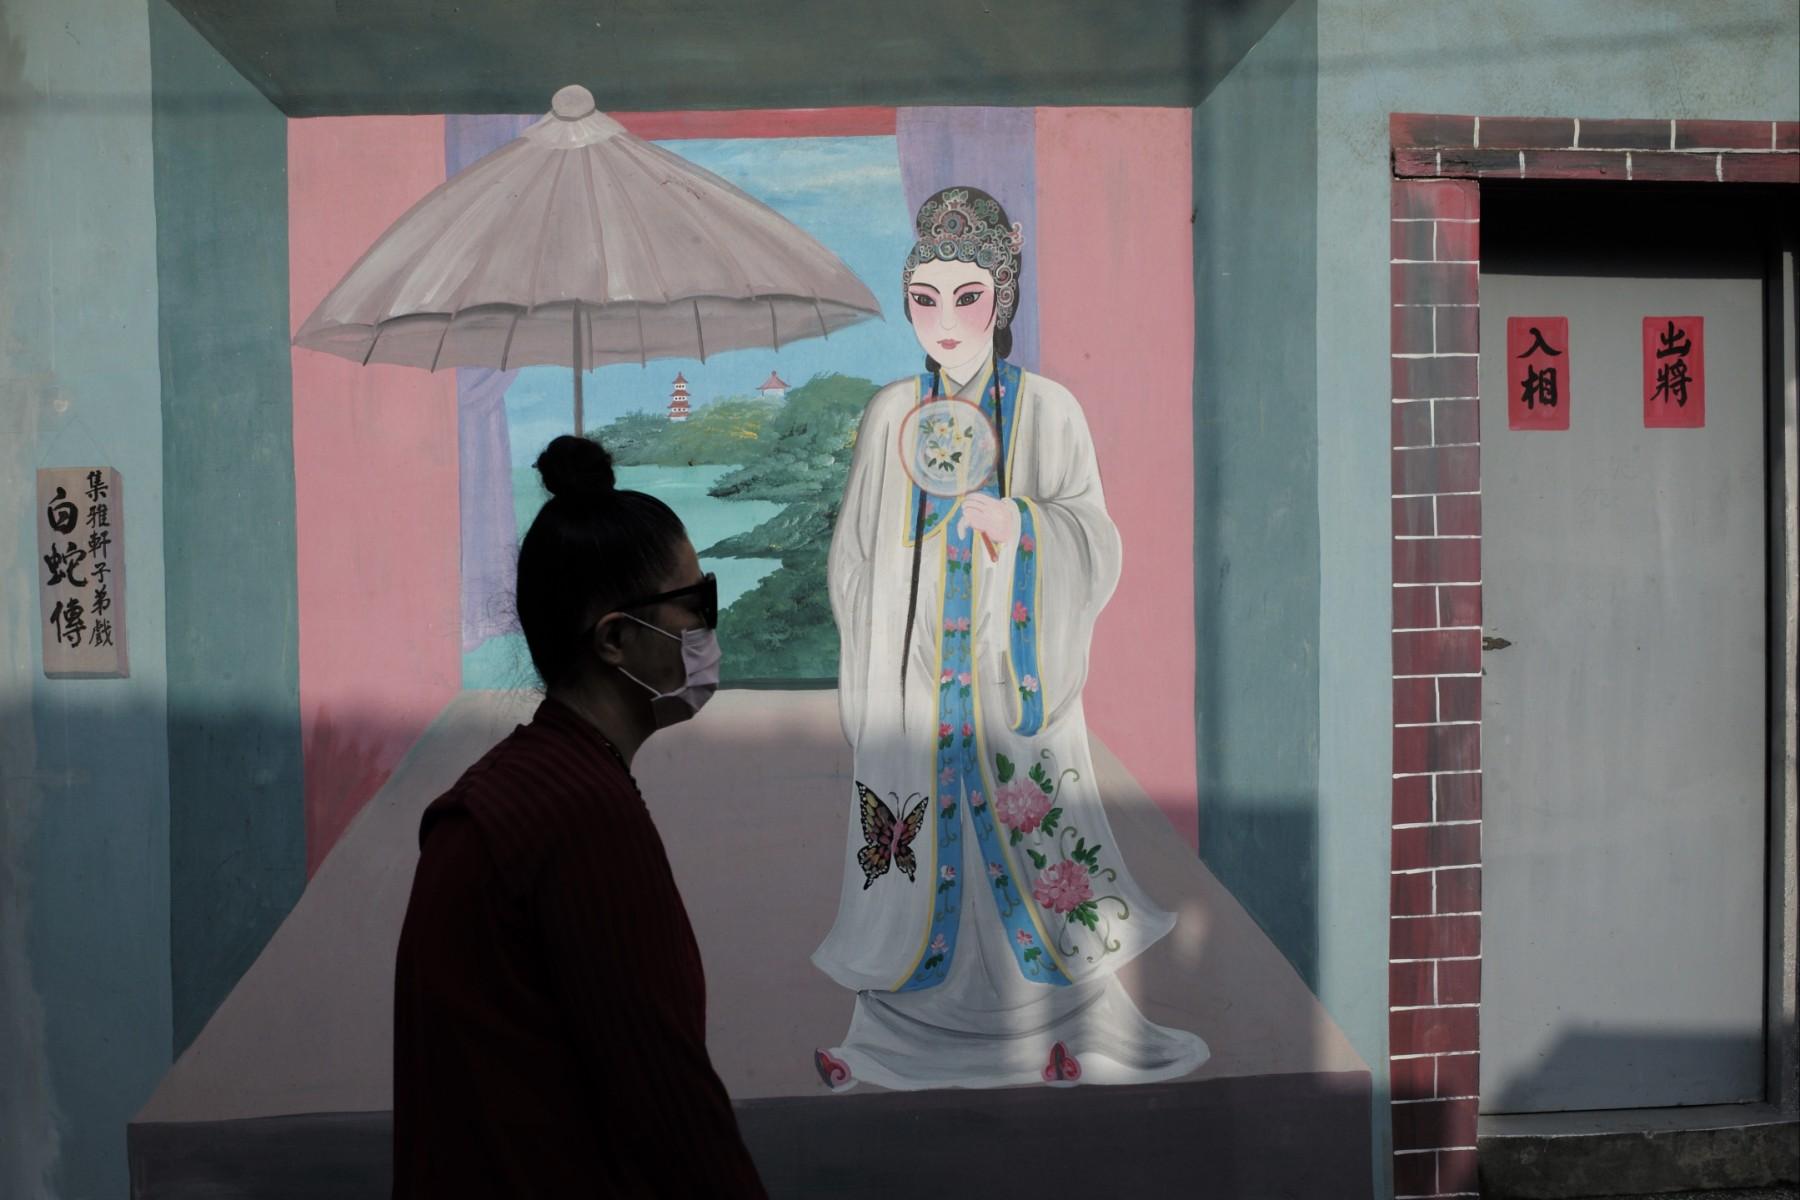 A man walks past a painted wall showing the 'Legend of the White Snake' in Beigang township in Chiayi county on May 21. Taiwan is excluded from most global groups due to Beijing's objections. Photo: AFP